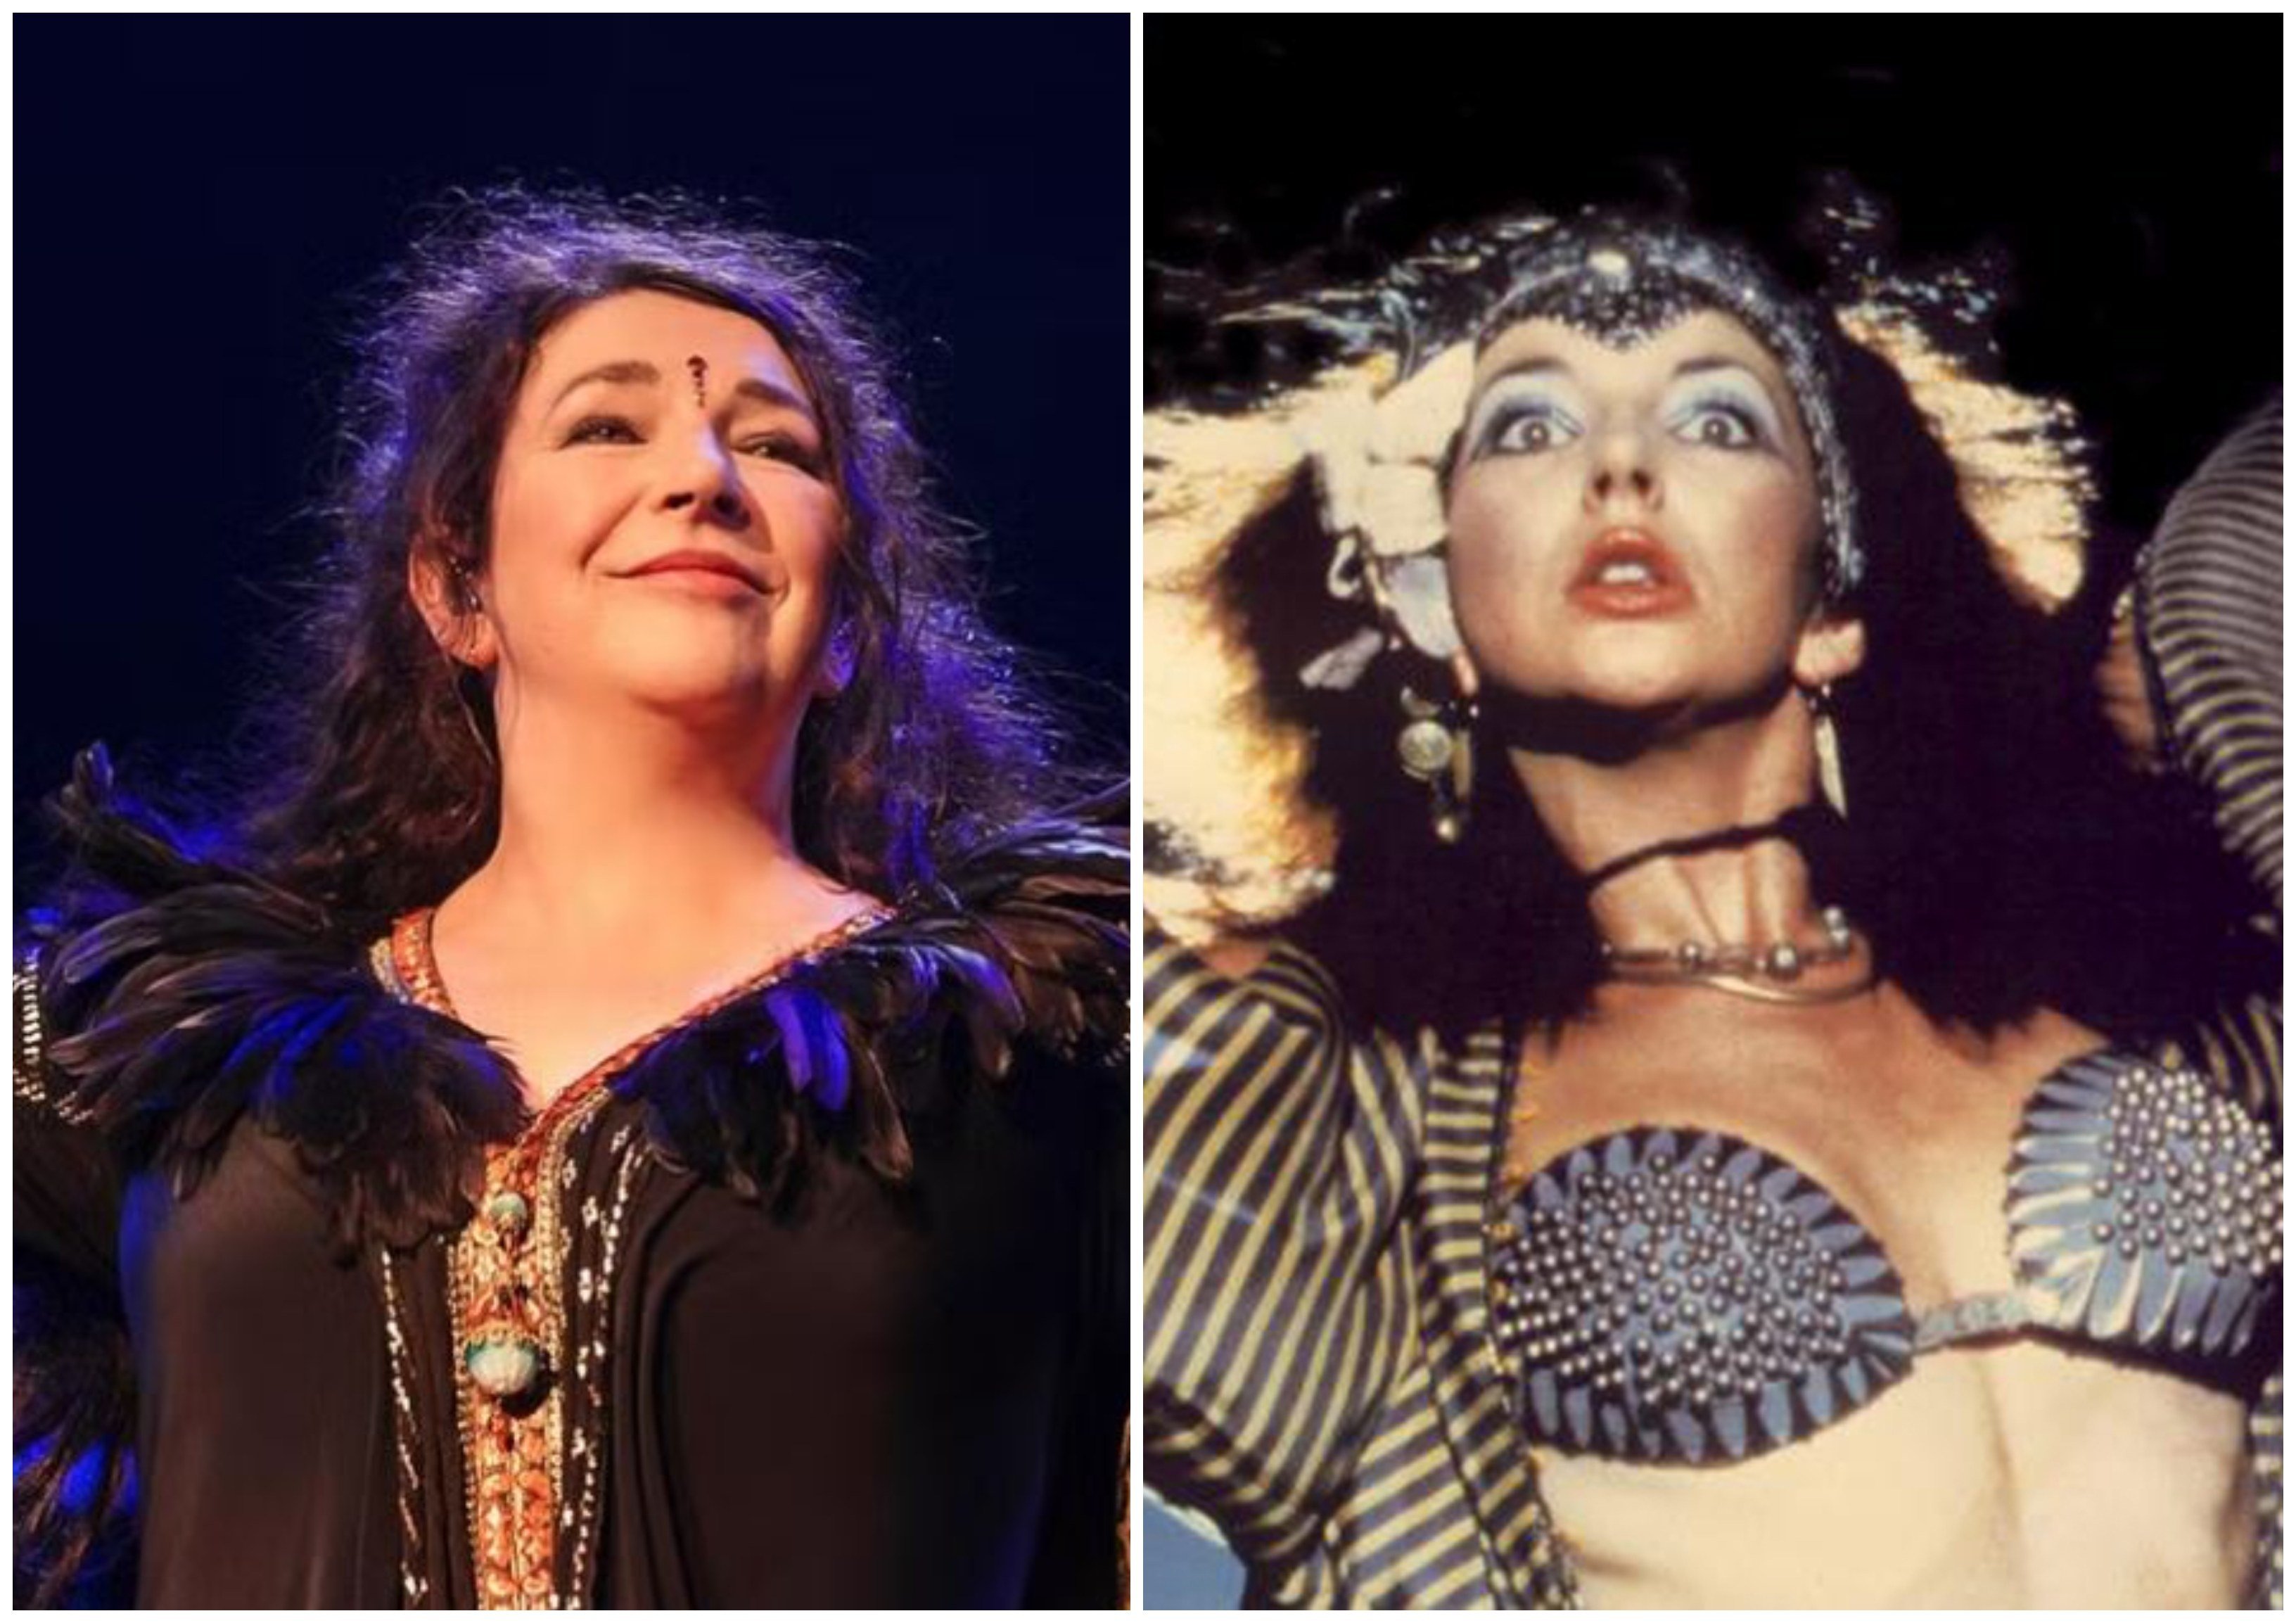 Whatever happened to Kate Bush, singer of Stranger Things hit song Running  Up That Hill? From her US$60 million net worth and reclusive lifestyle, to  her 1985 hit making a chart comeback